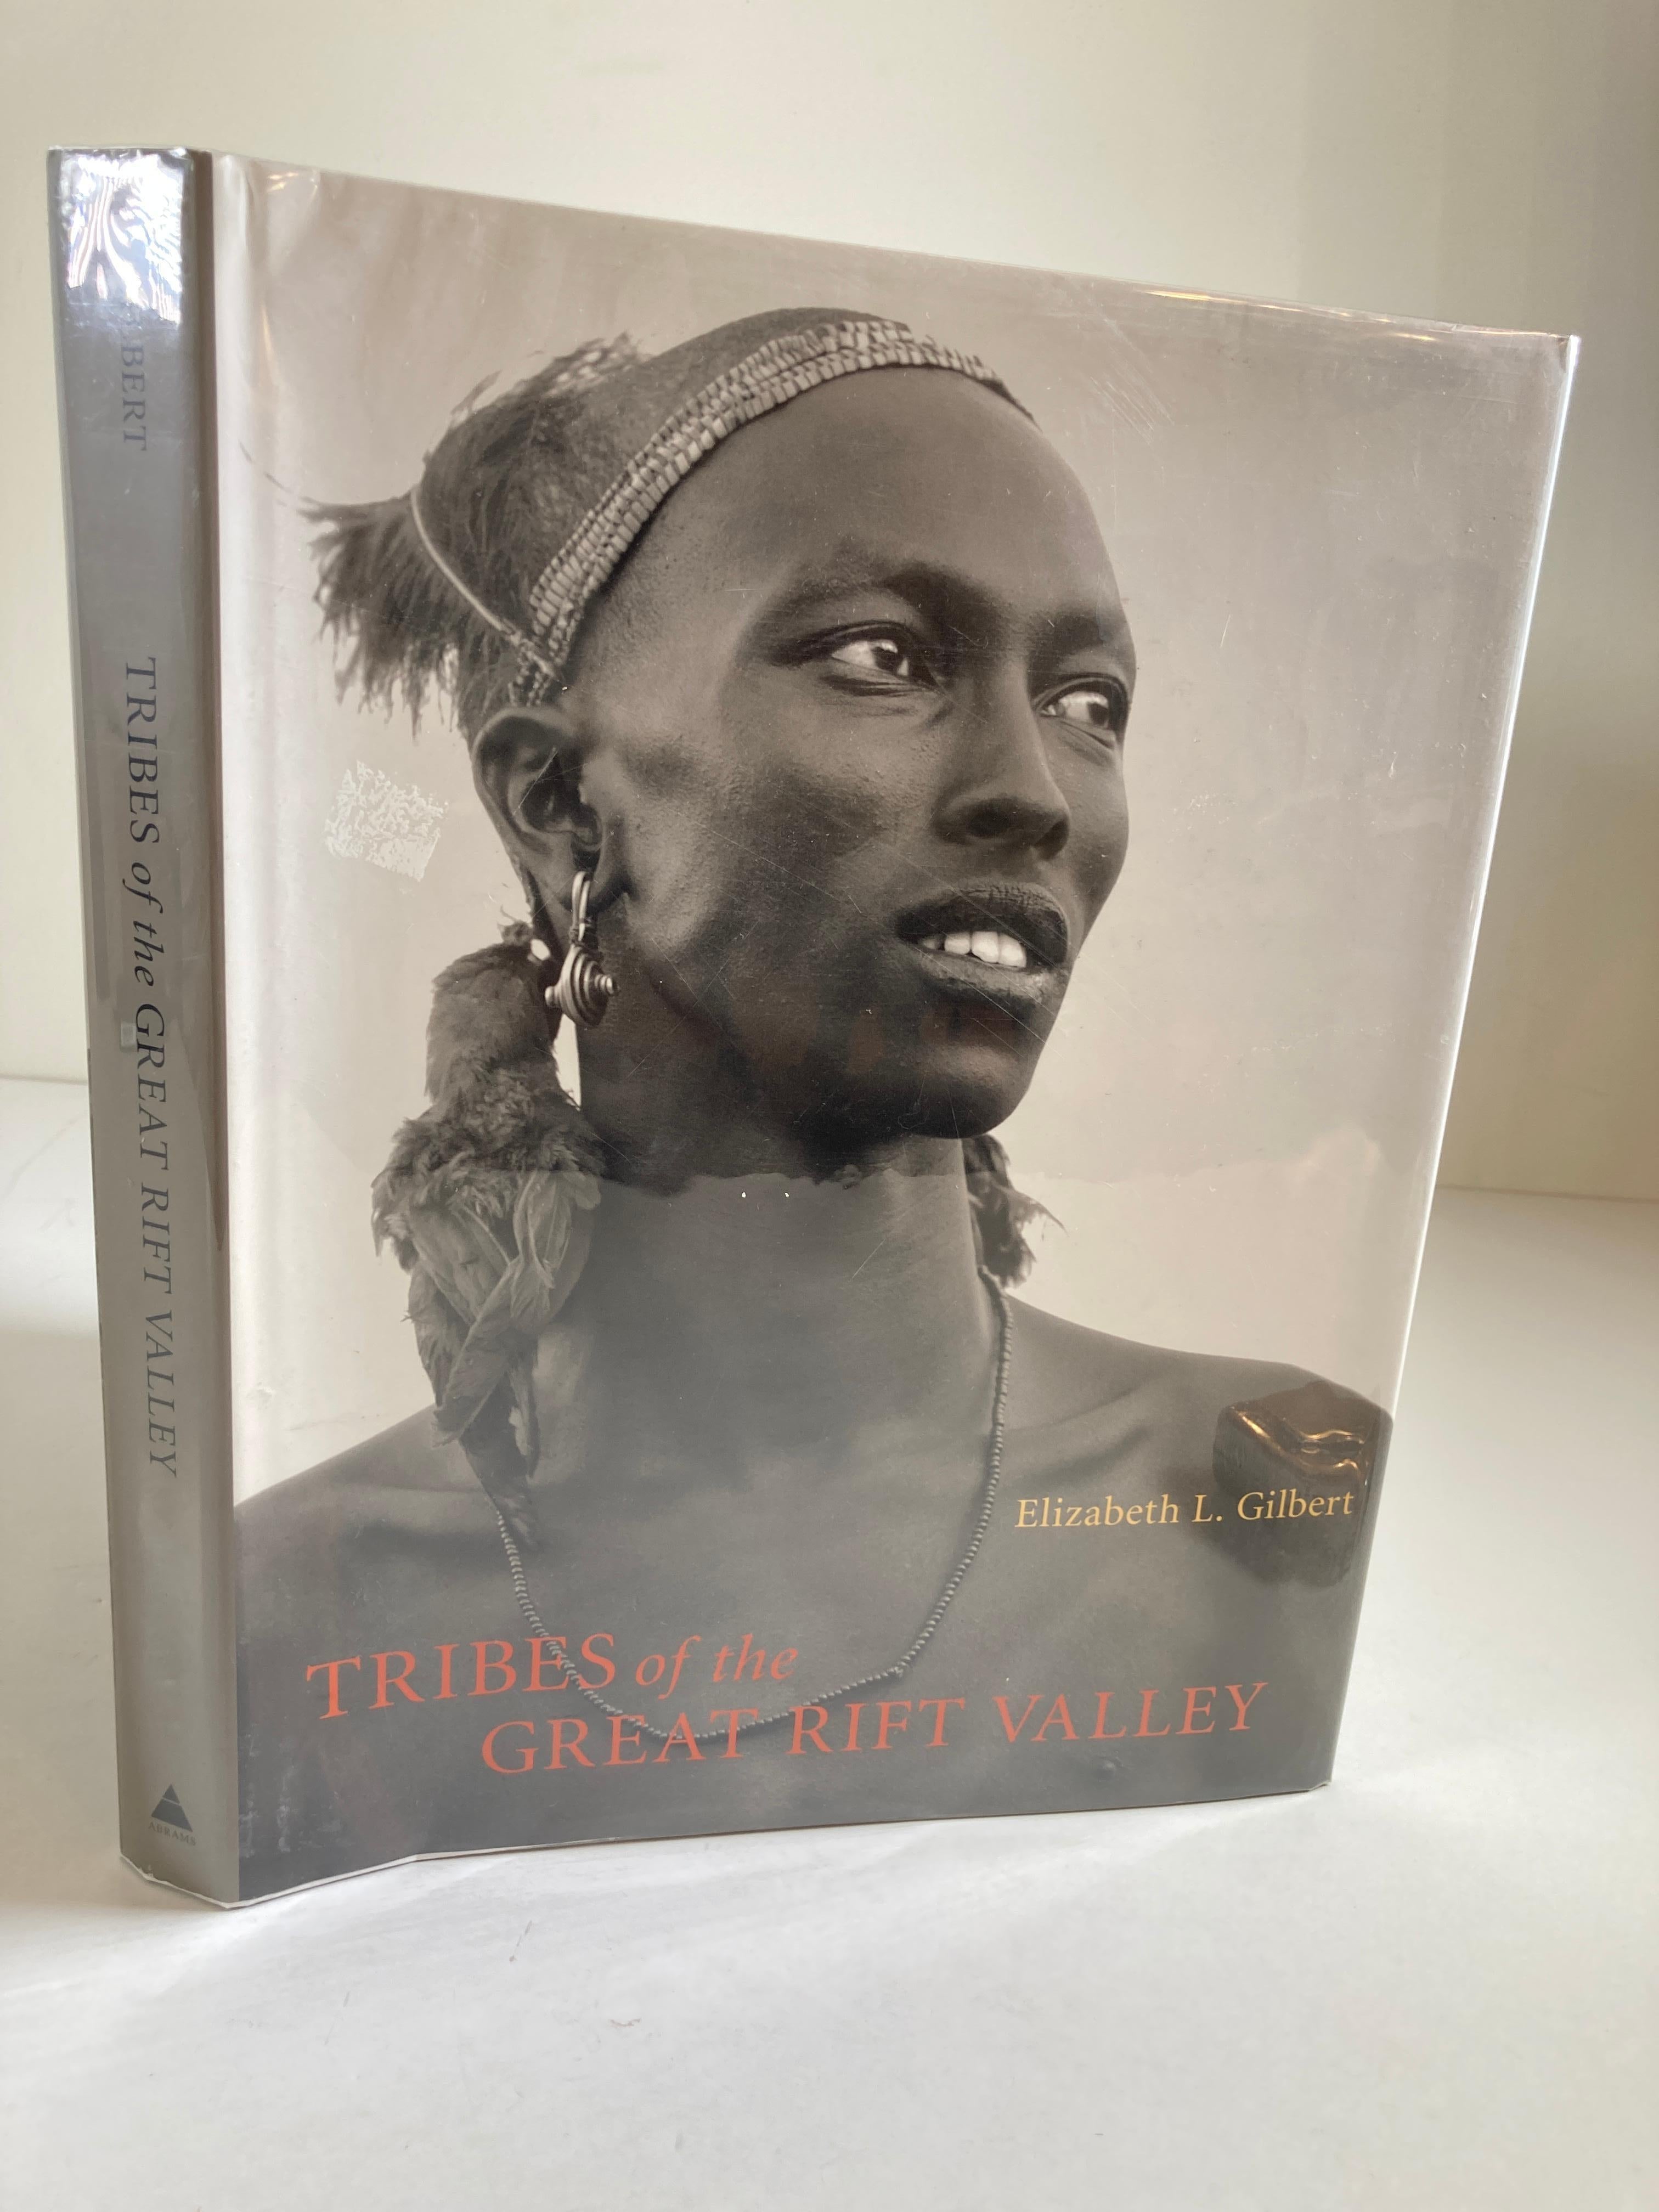 Tribes of the Great Rift Valley hardcover book by Anup Sah, E. L.Gilbert, M Shah.
Tribes of the Great Rift Valley is a celebration and photographic study of the traditional peoples who occupy the tiny, remote villages scattered across the deserts,